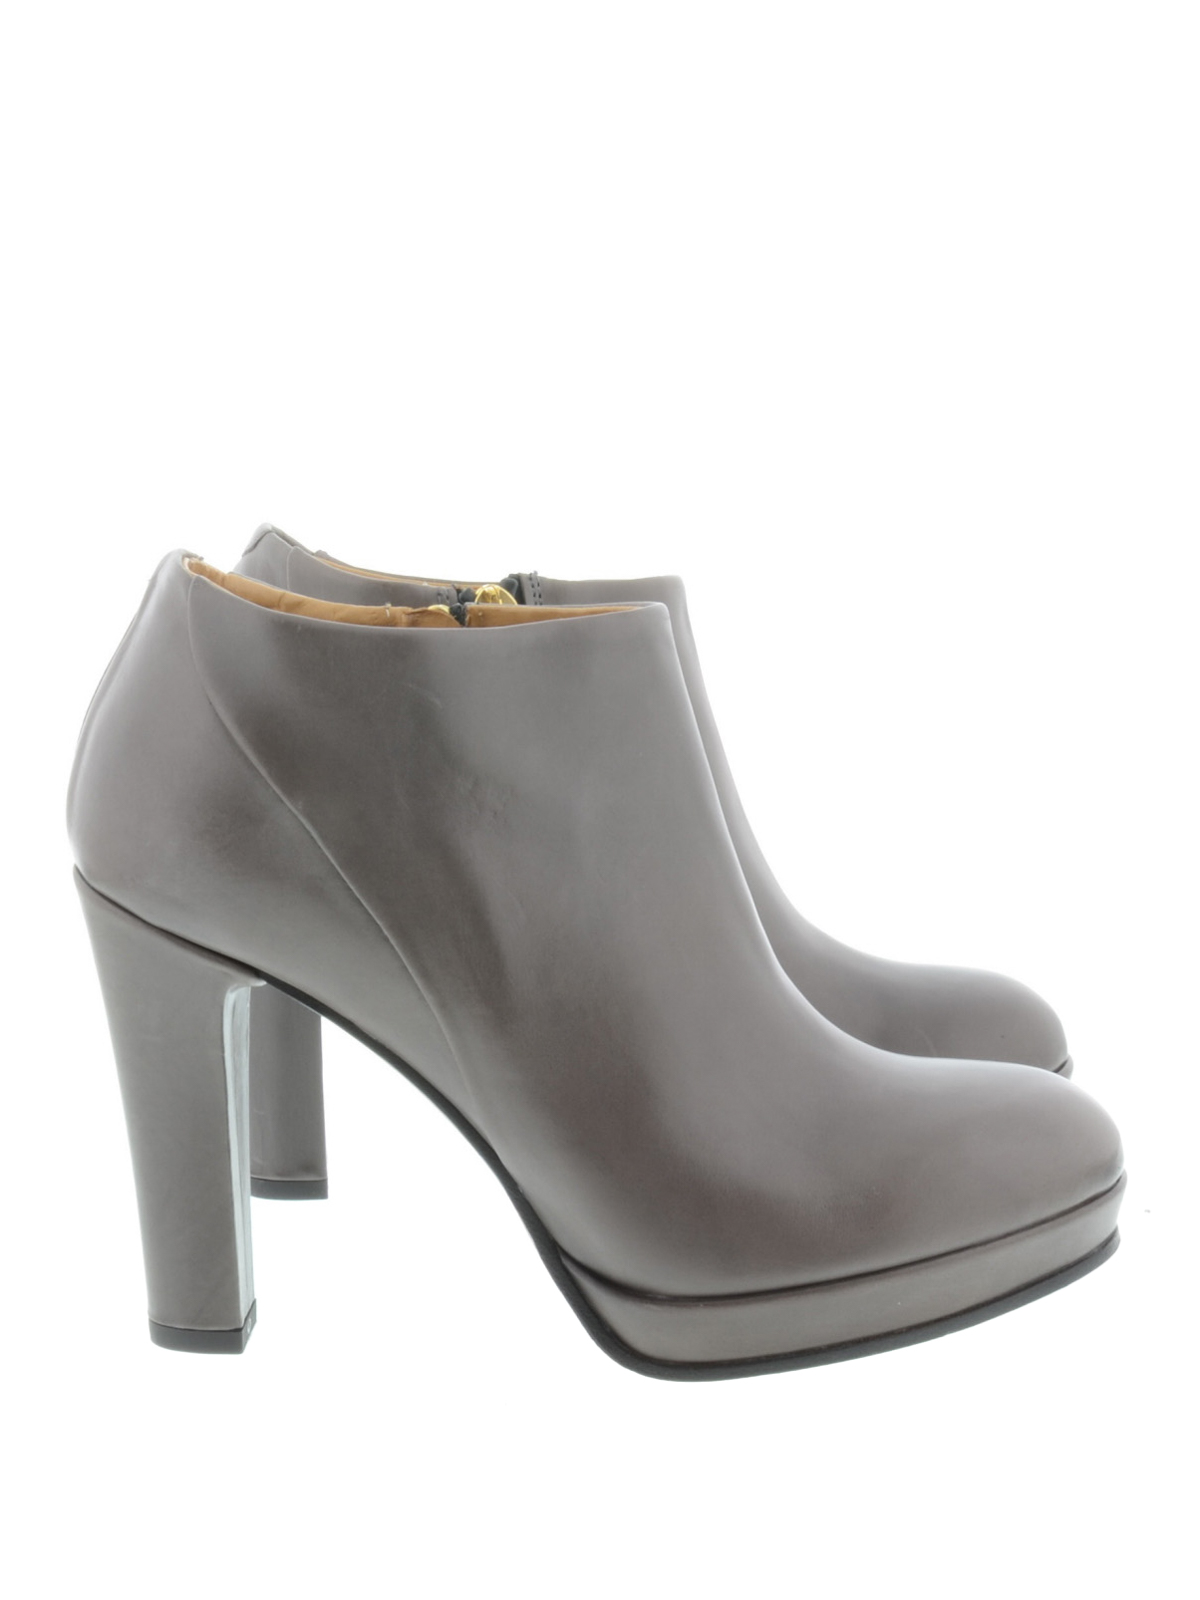 Ankle boots Alberto Fermani Parma zipped boots - MIC012GREY